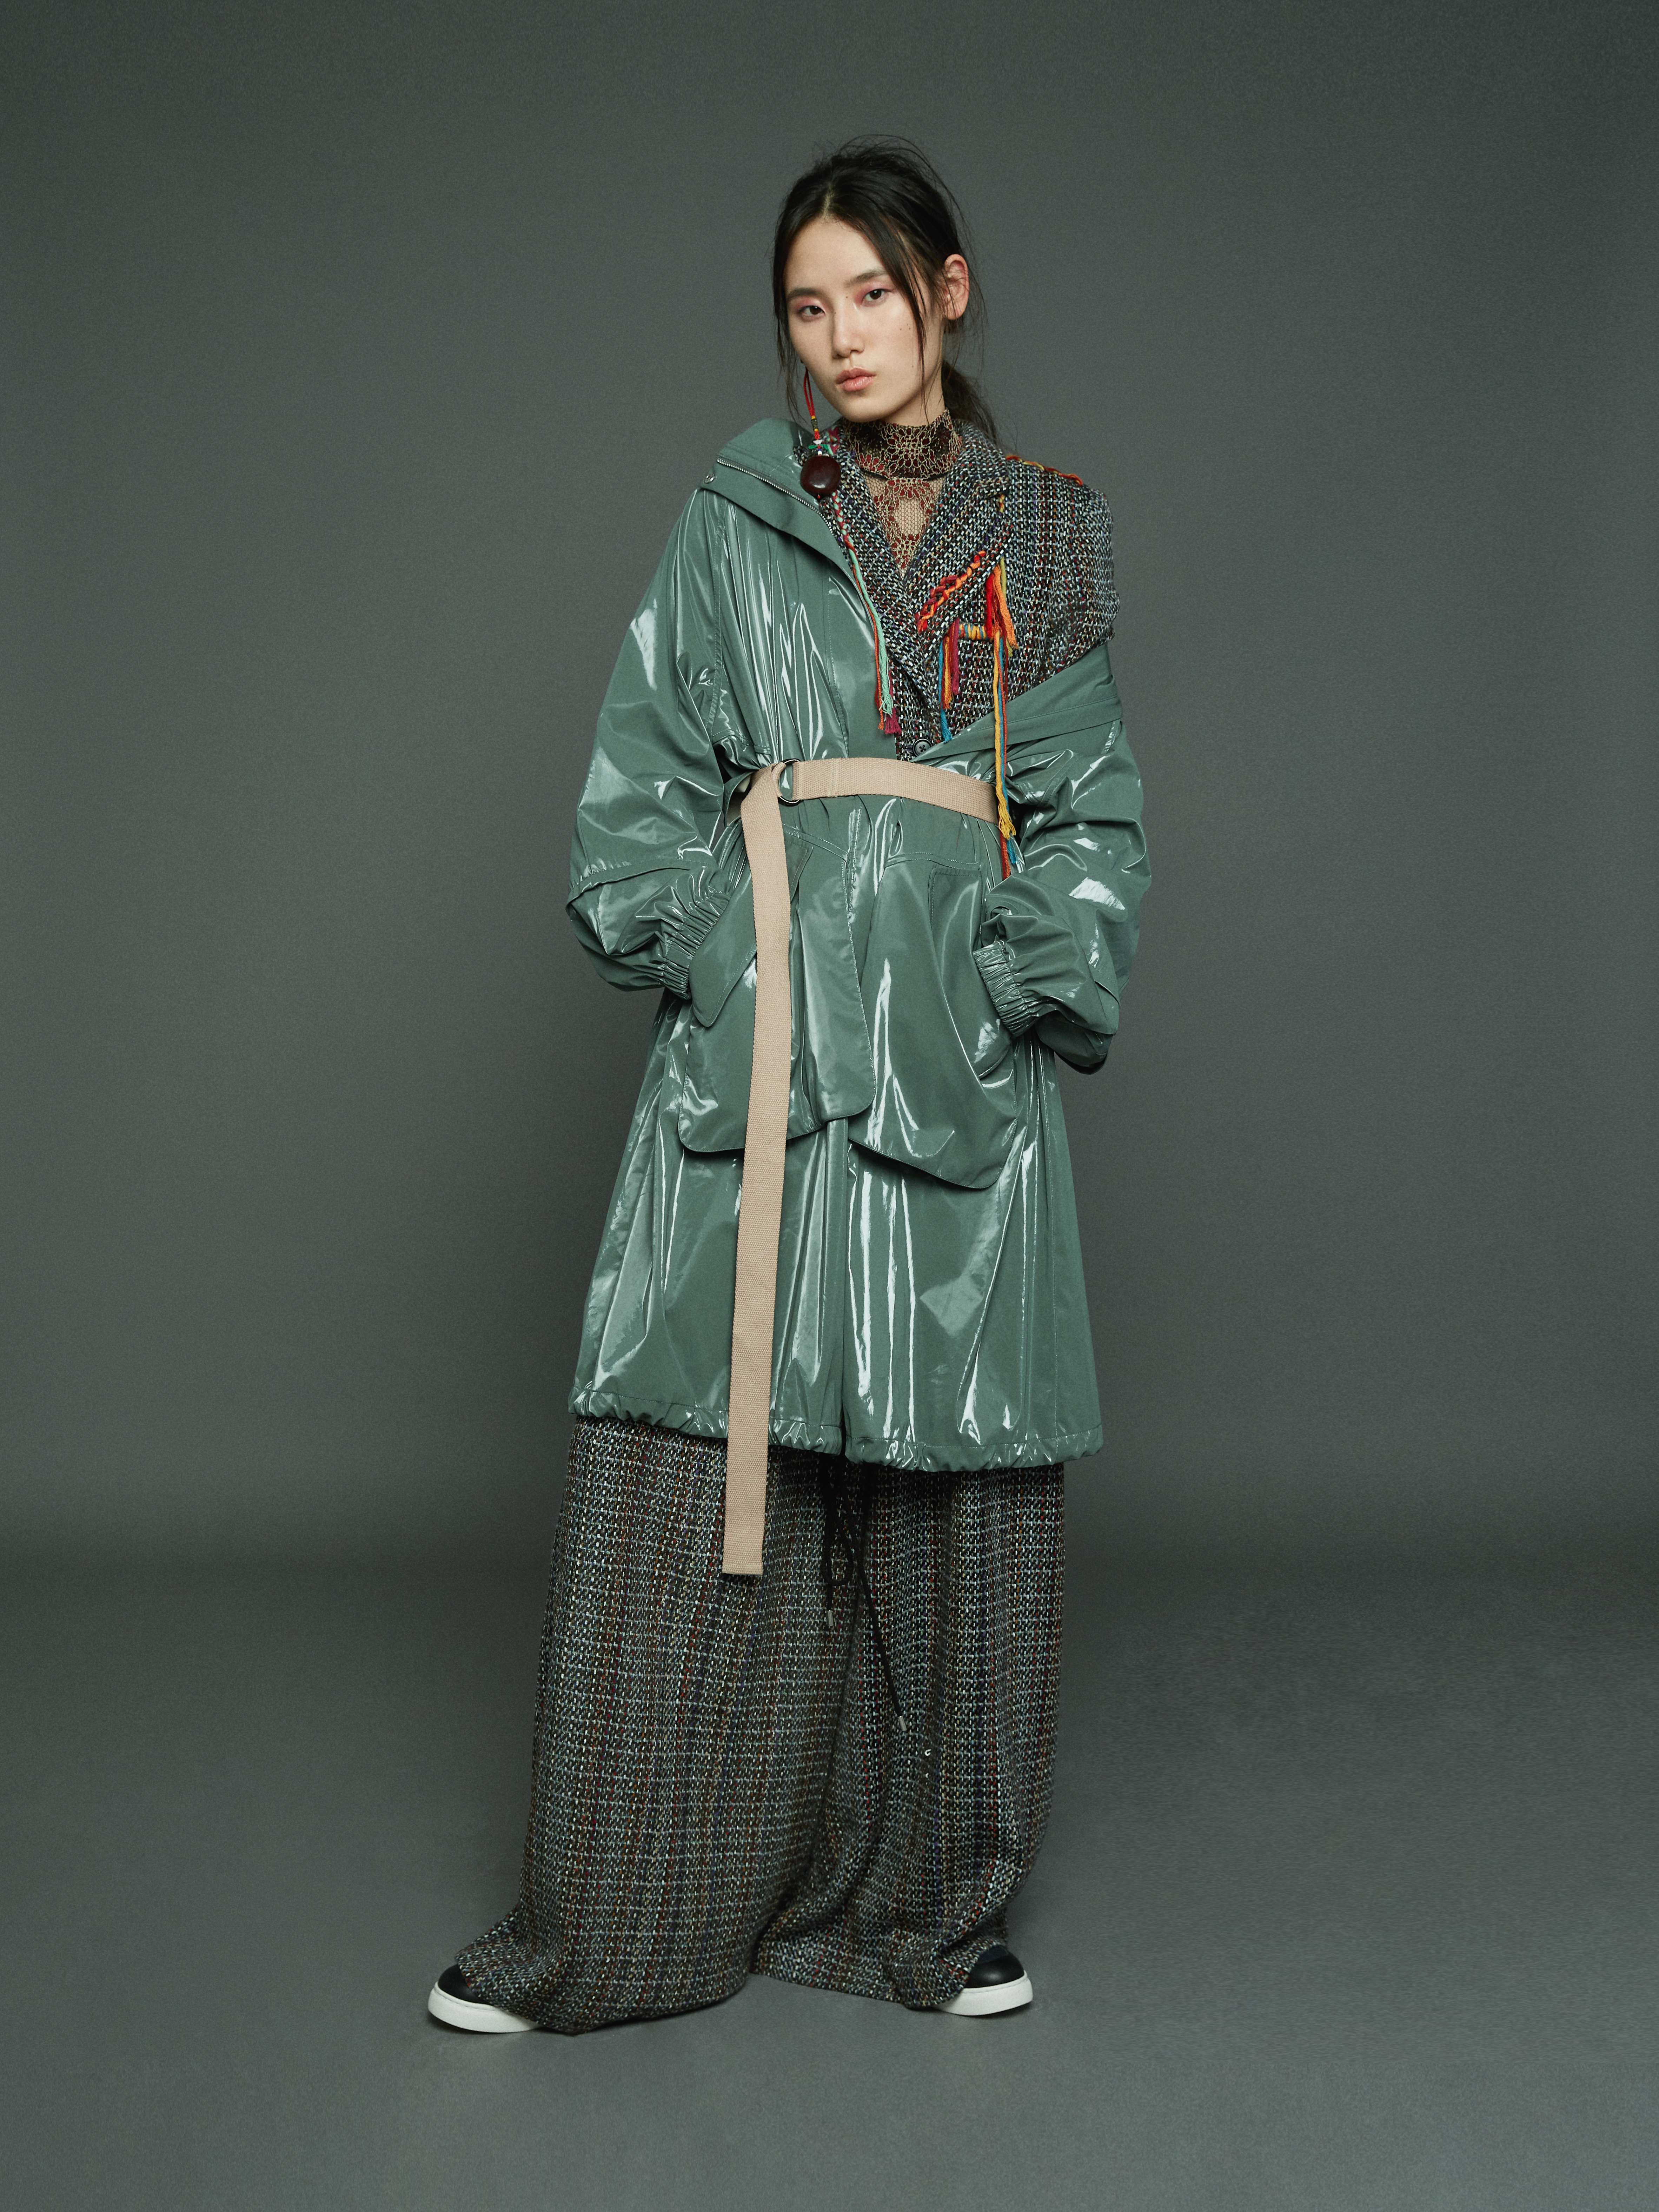 Vivienne Tam Fall/Winter 2018 Collection